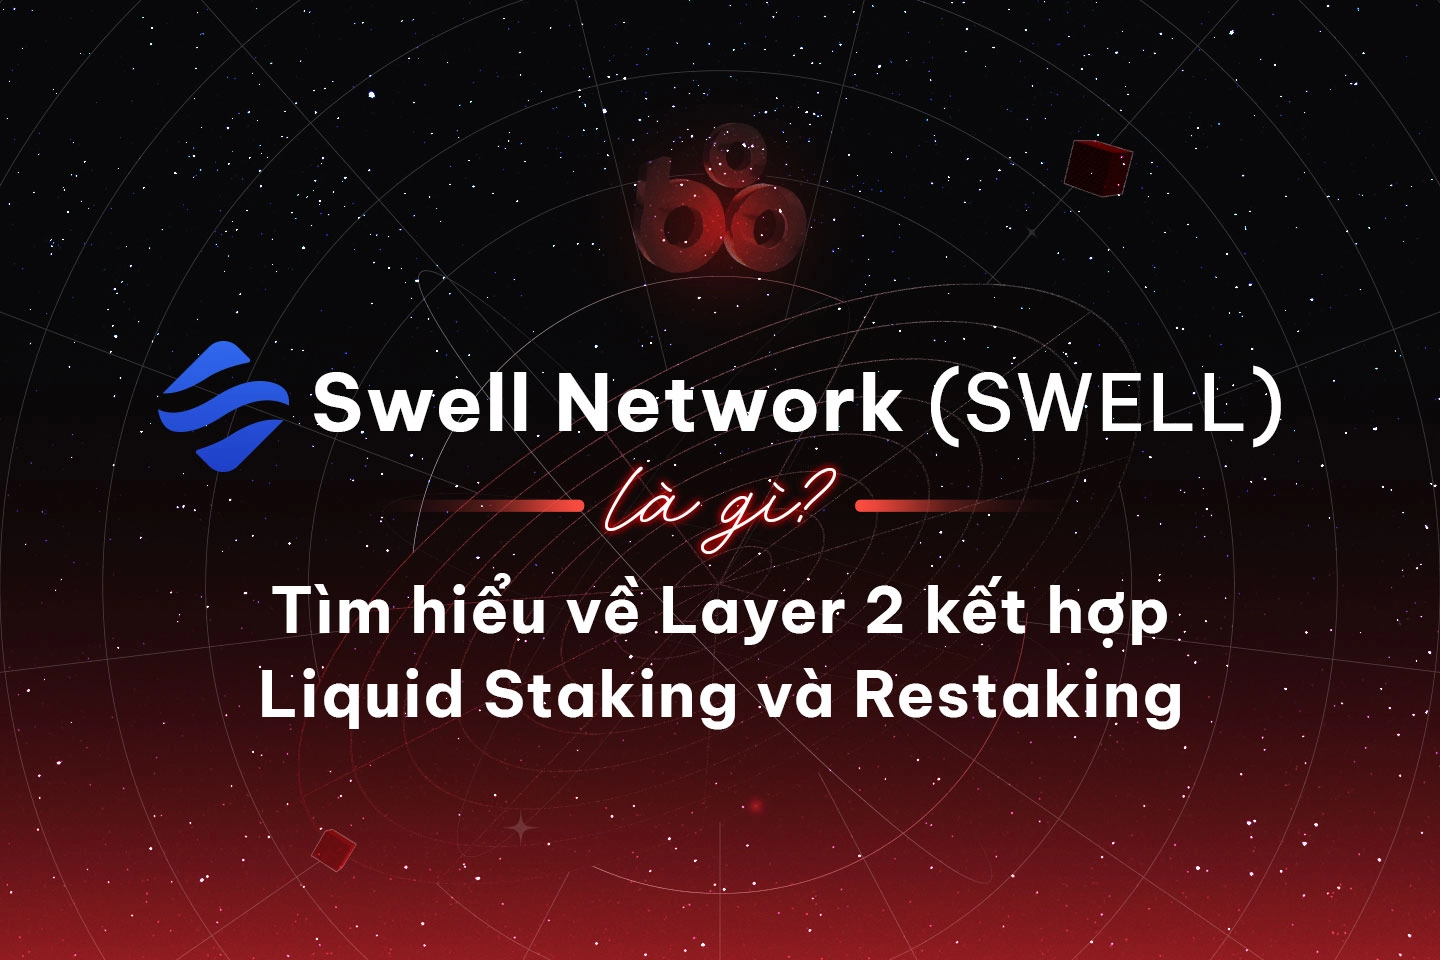 Swell Network: Layer 2 Combines Liquid Staking and Restaking